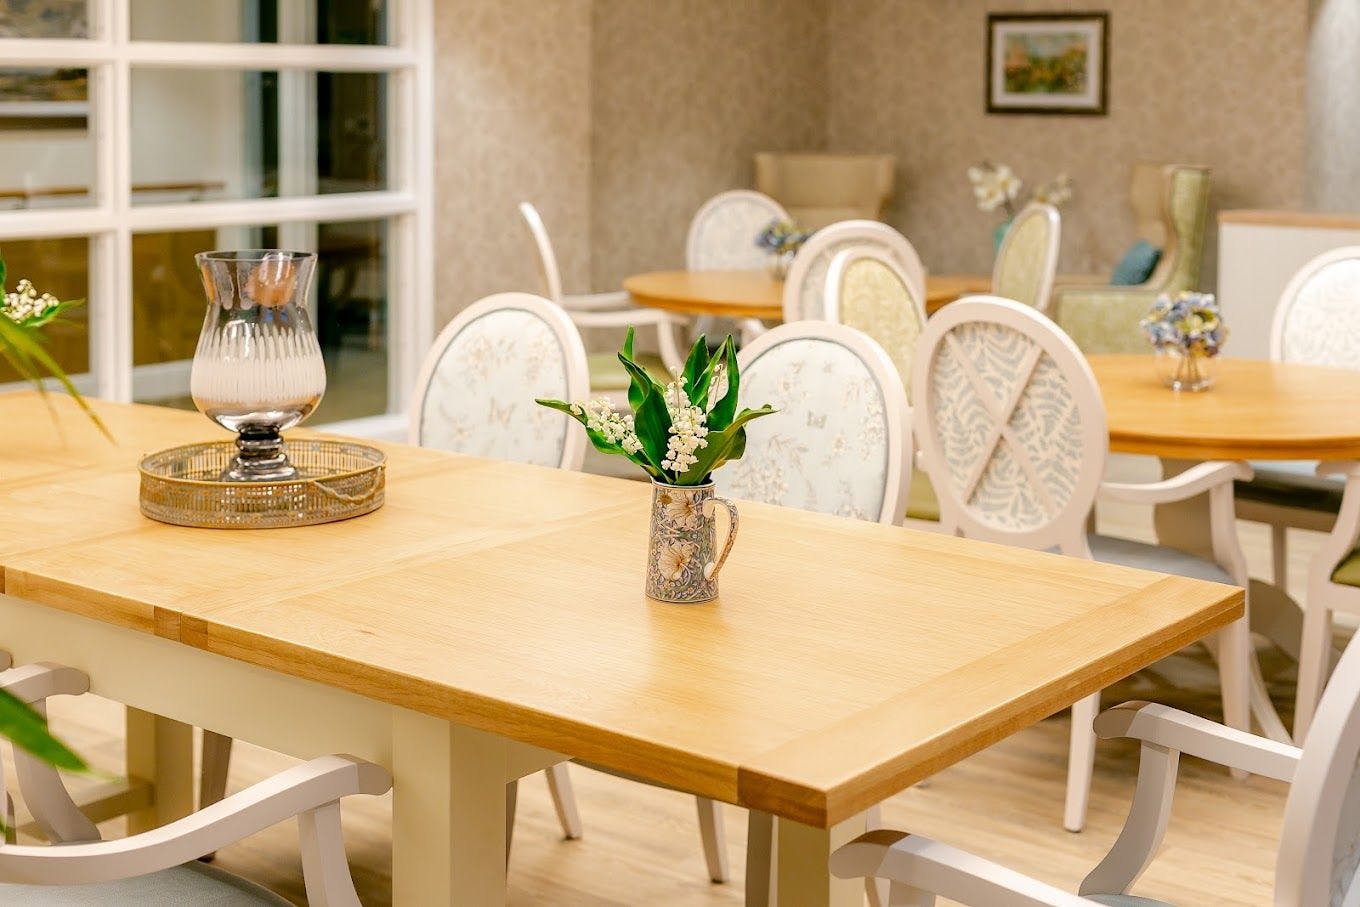 Dining Area at Chapter House Care Home in Beverley, East Riding of Yorkshire